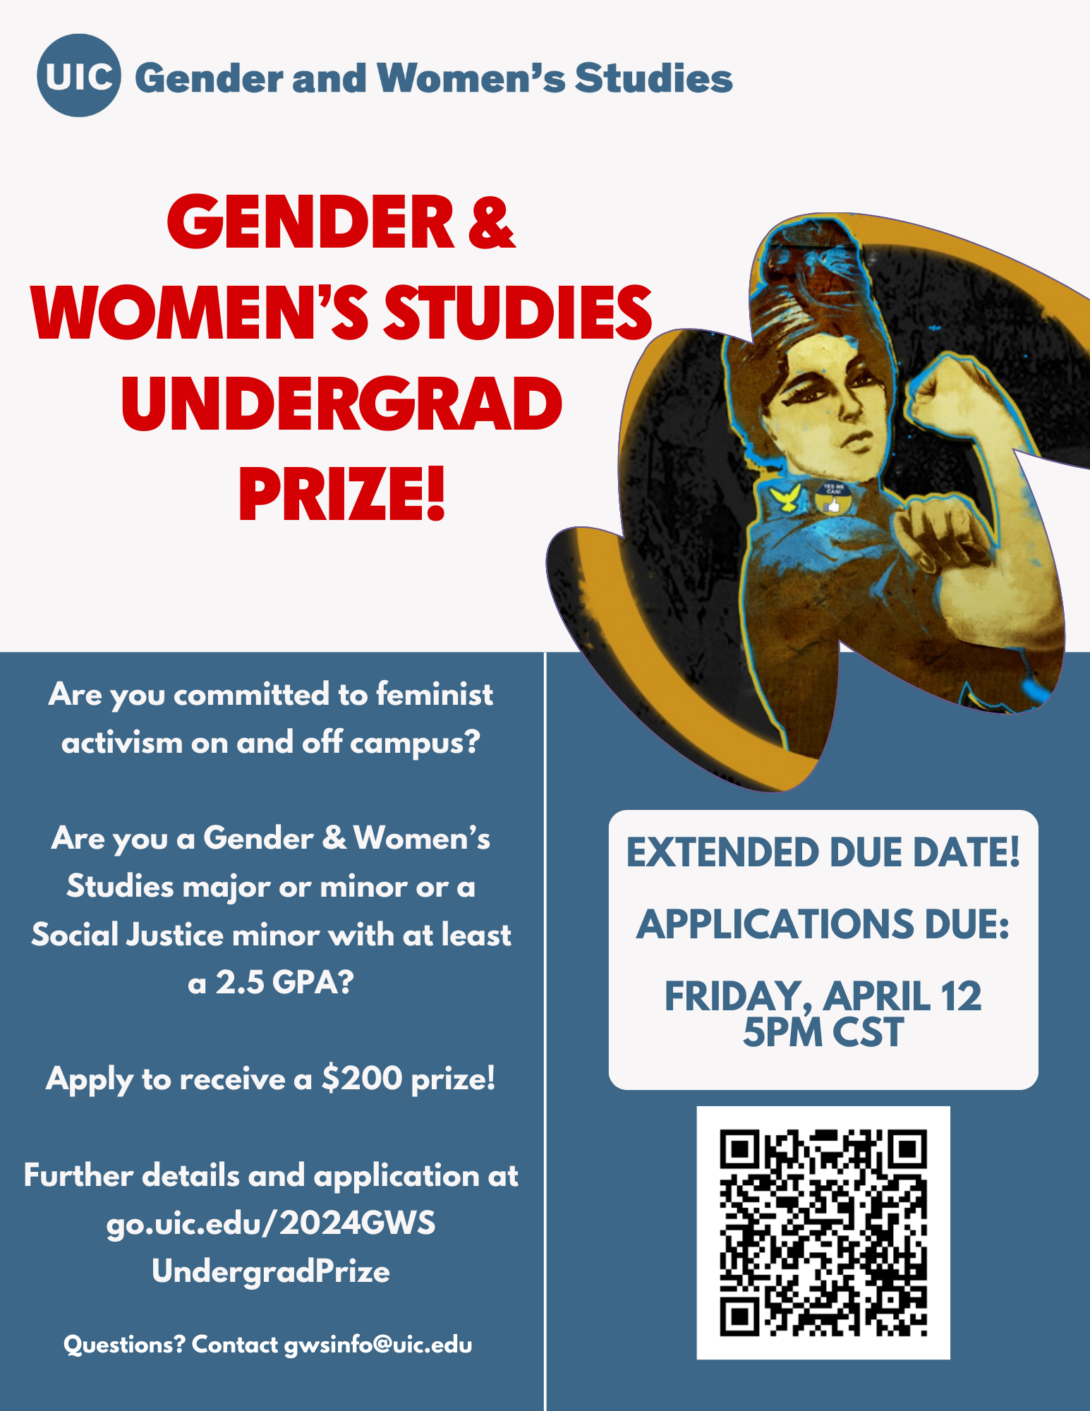 A flyer explaining the GWS Undergrad Prize, application criteria, deadline, and application instructions, link, and QR code. The bottom half of the flyer has a purple background and white text. The top half of the flyer has a white background and teal text. On the right, top half of the flyer is an image of Rosie the Riveter in an asymmetrical cutout design. The GWS logo in teal appears in the top left portion of the flyer.